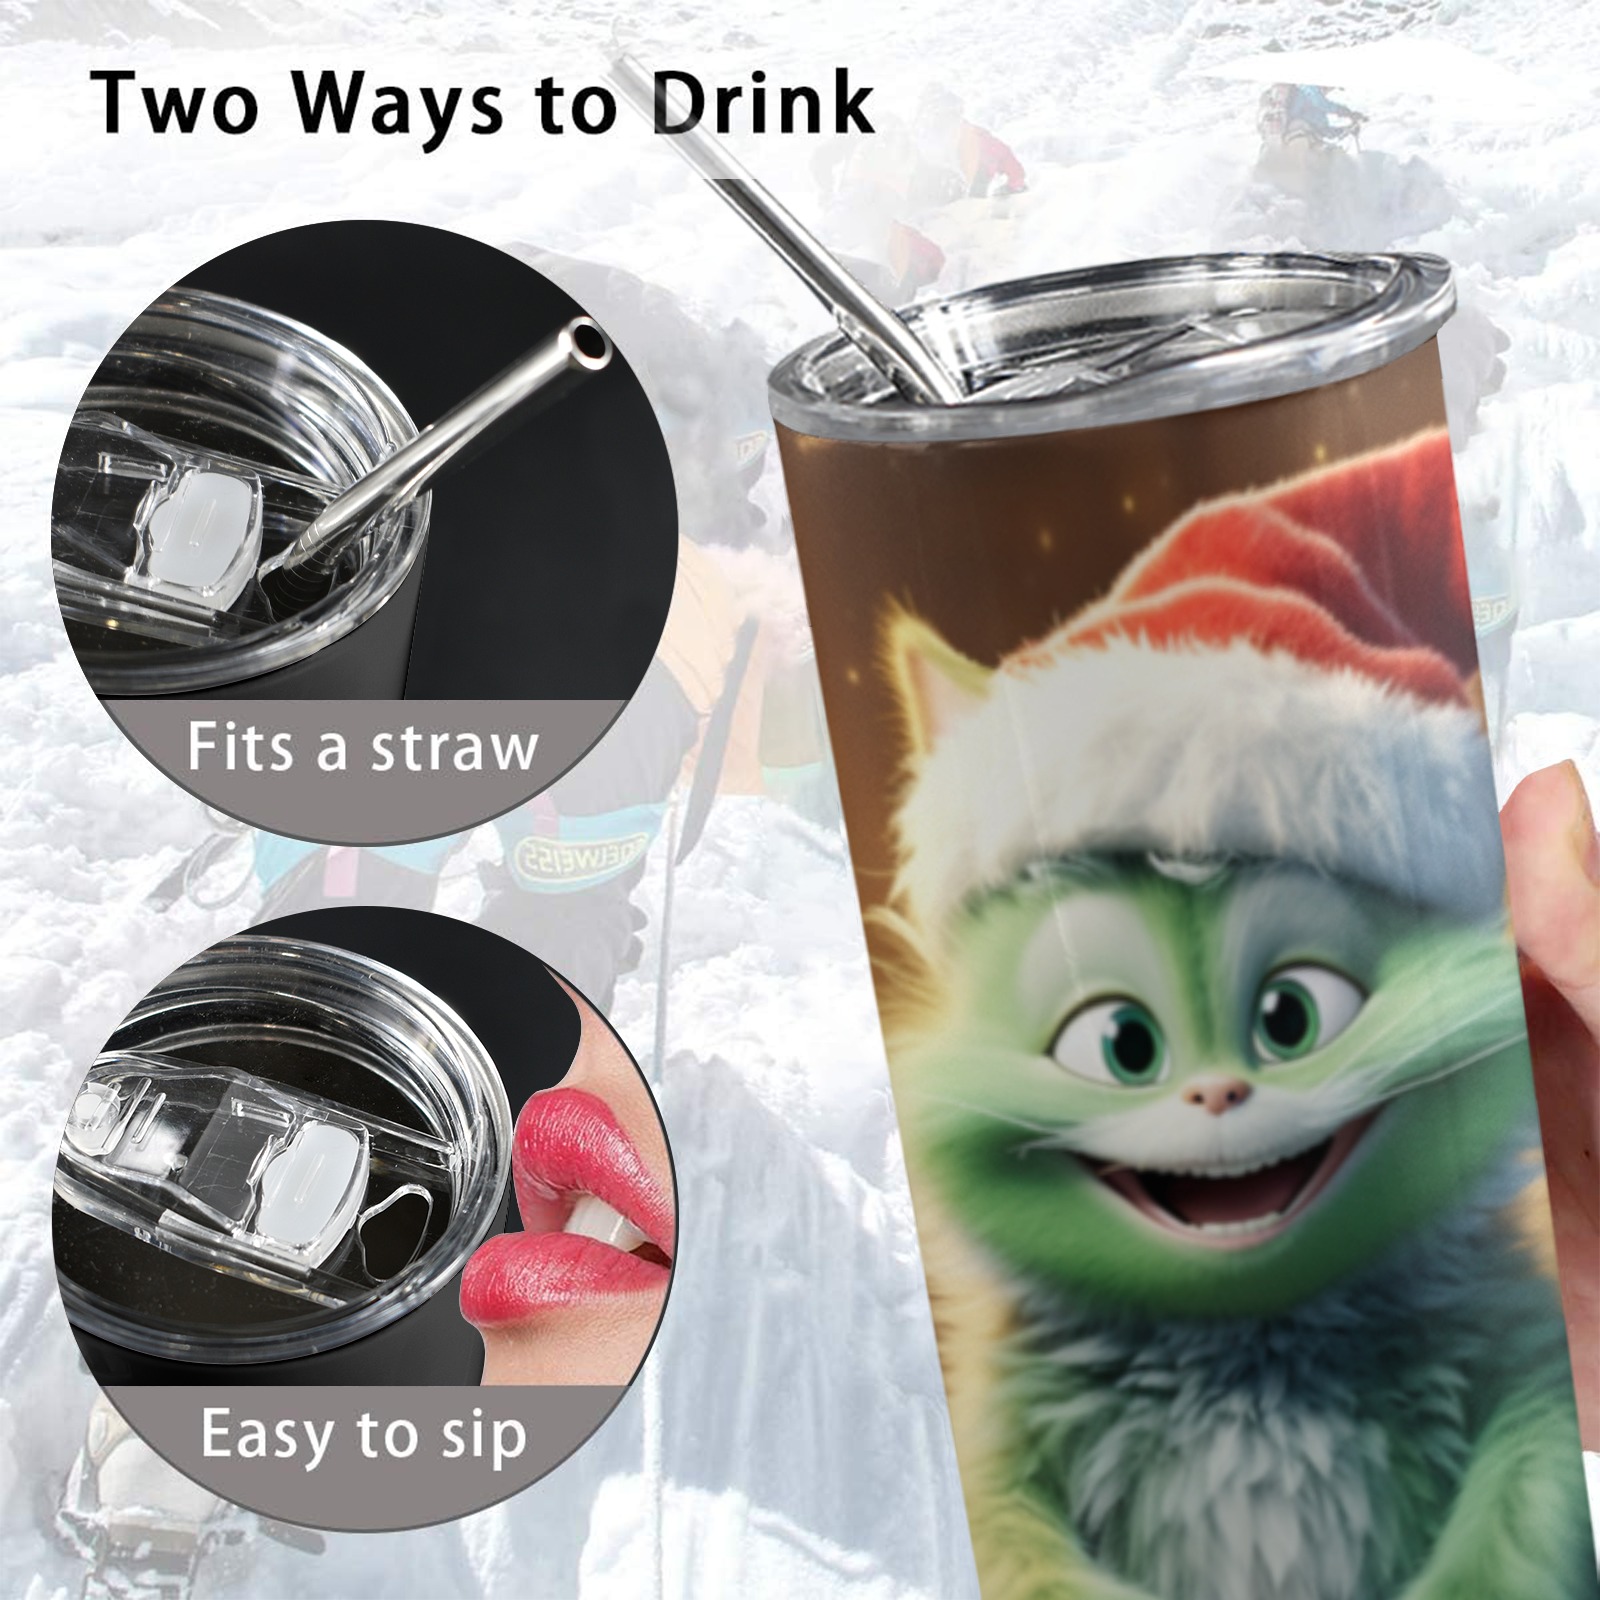 Cute Green Happy Christmas Kitty 20oz Tall Skinny Tumbler with Lid and Straw